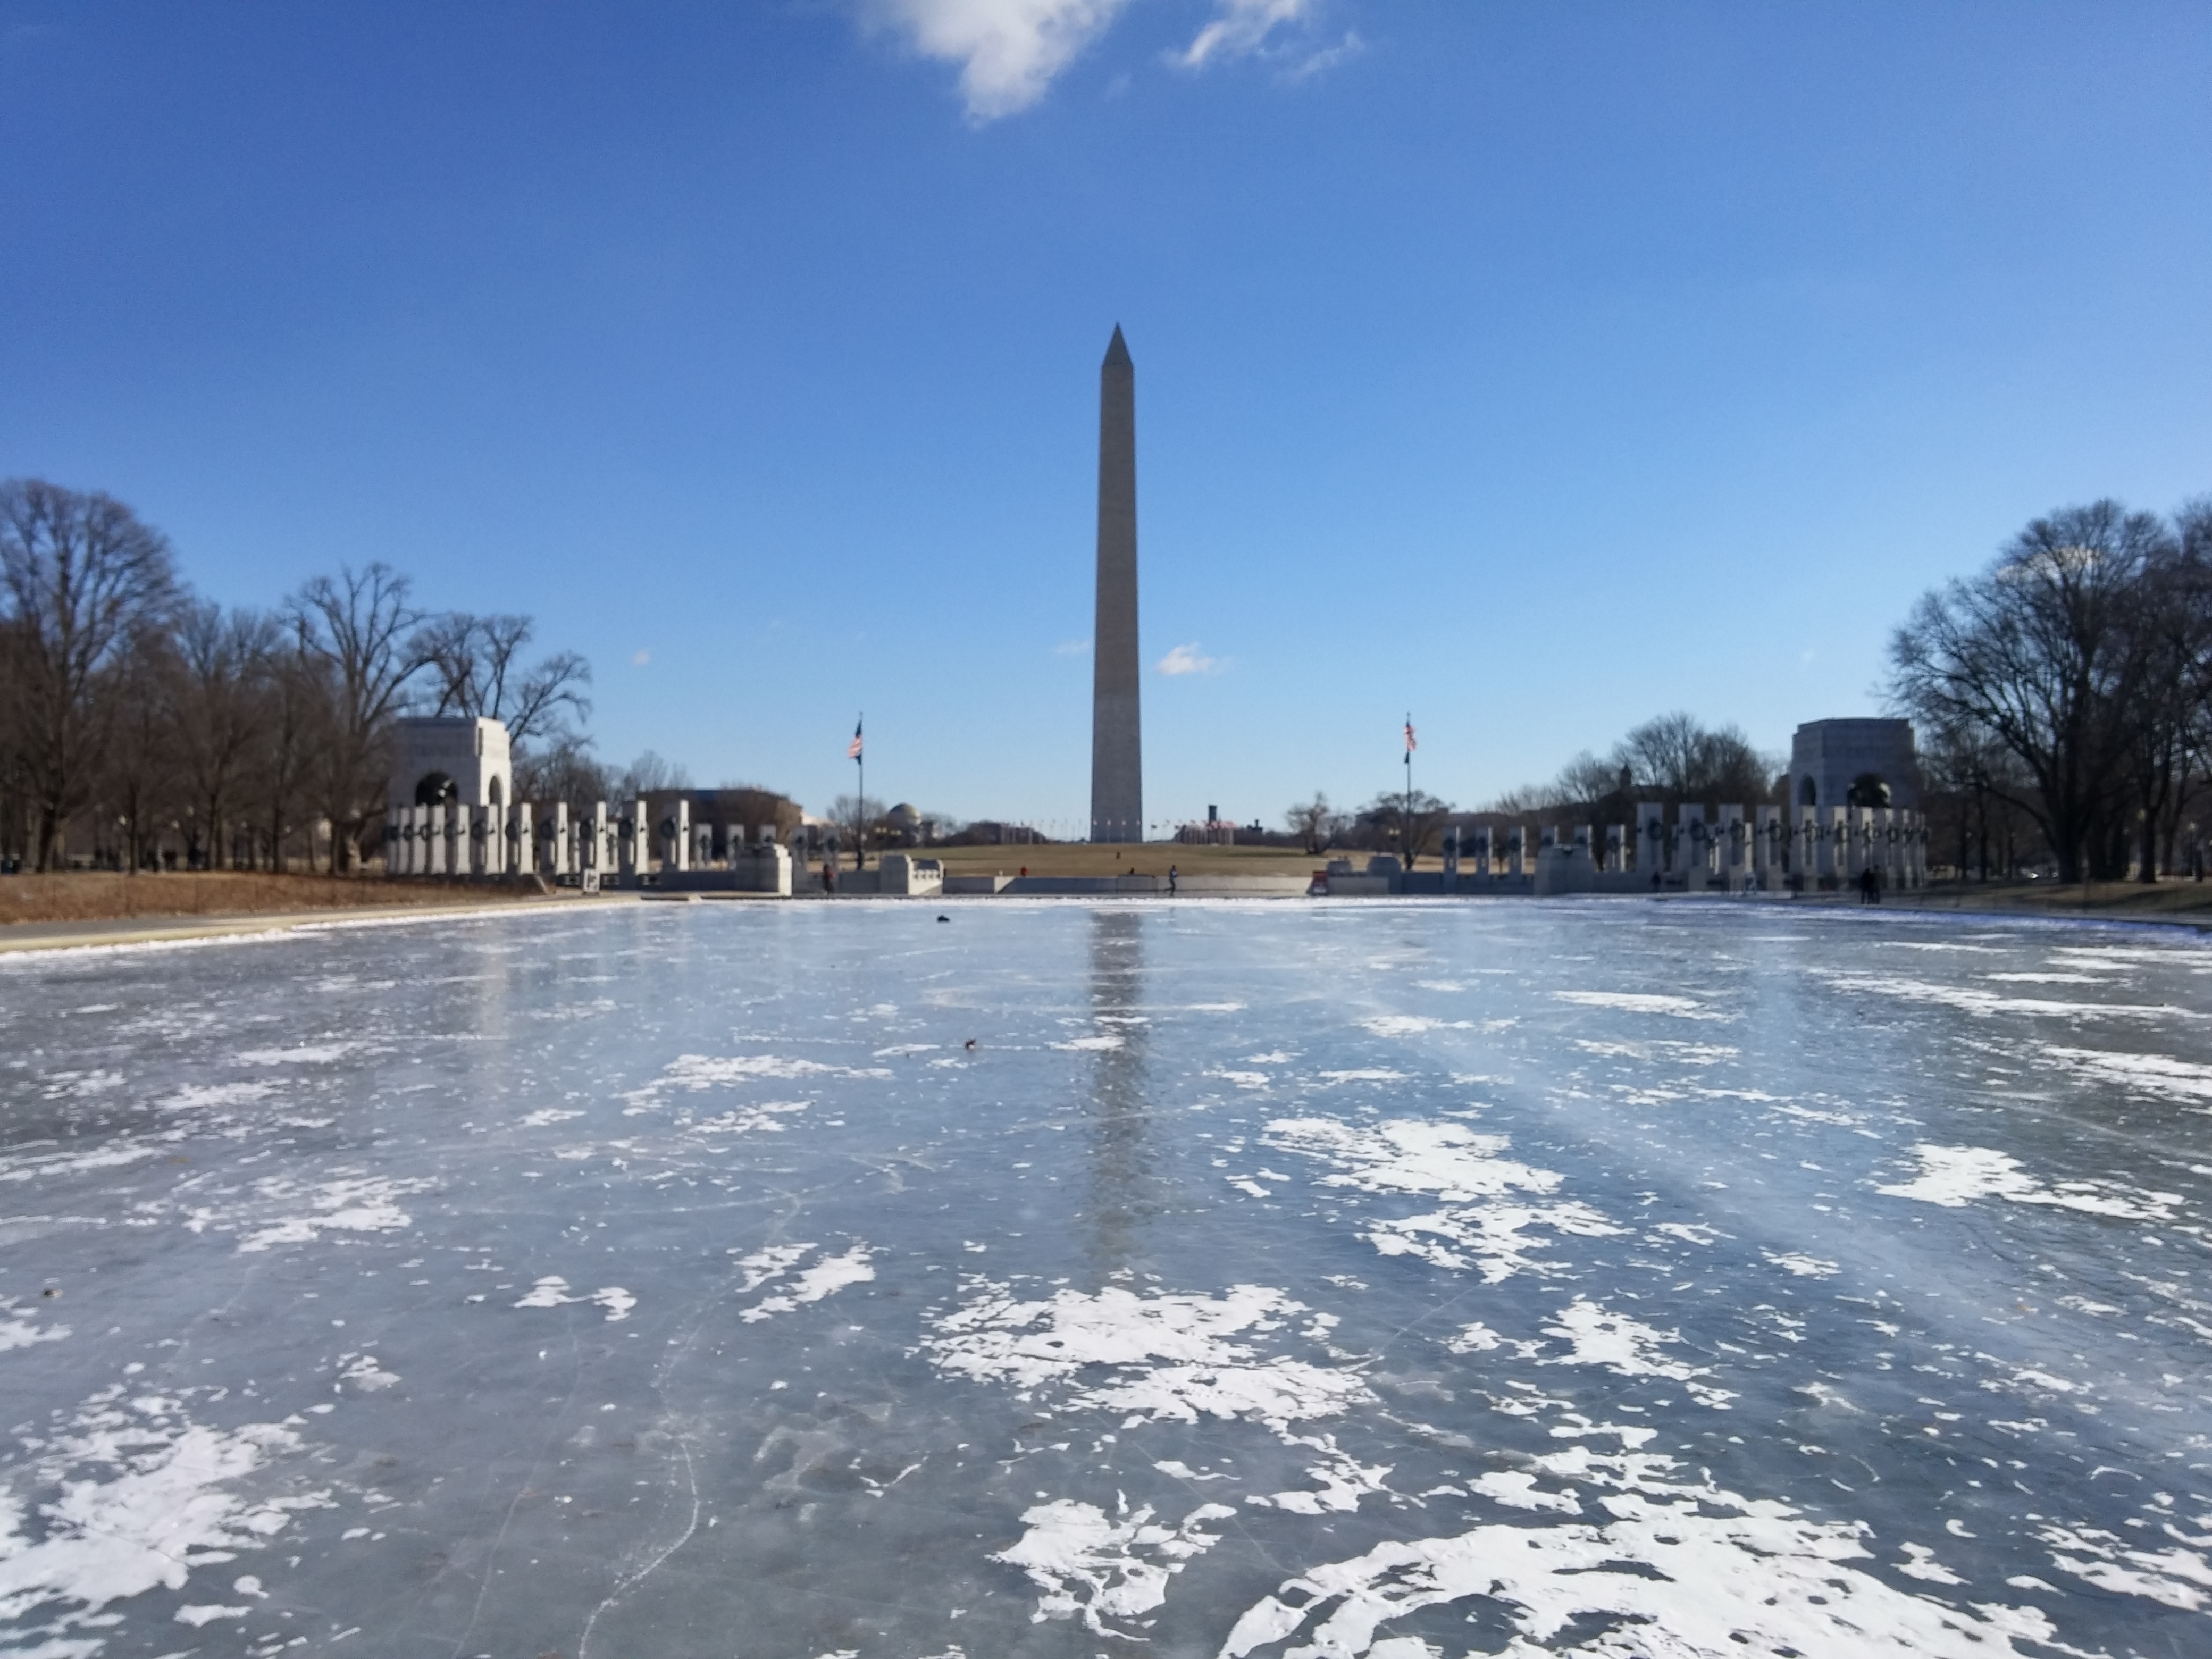 The frozen Lincoln Memorial Reflecting Pool